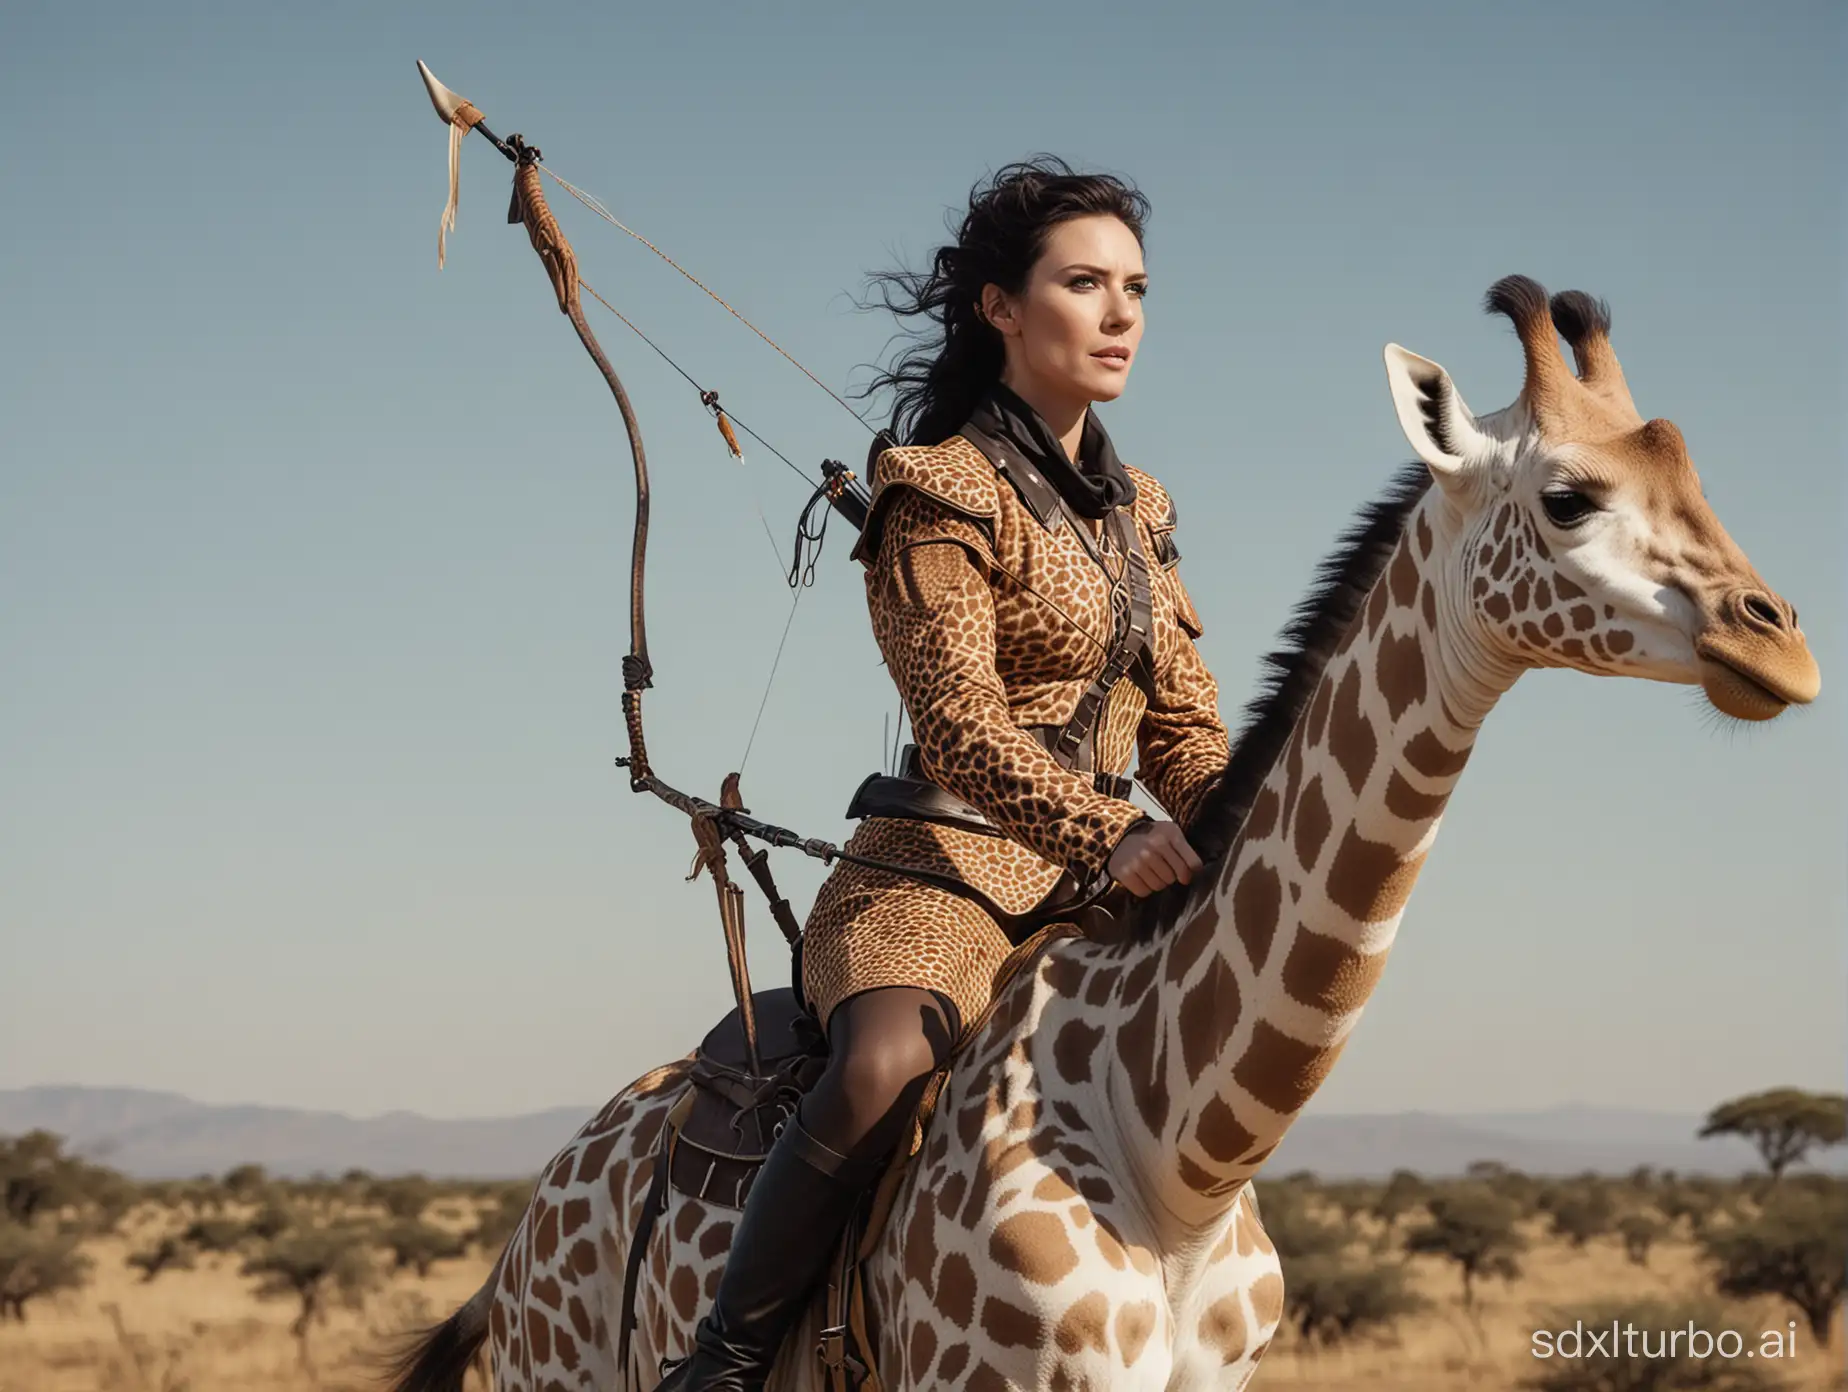 cinematic Medium Long Shot image of a white woman riding a giraffe. She has black hair and is holding a hunting bow. She is wearing silly armor